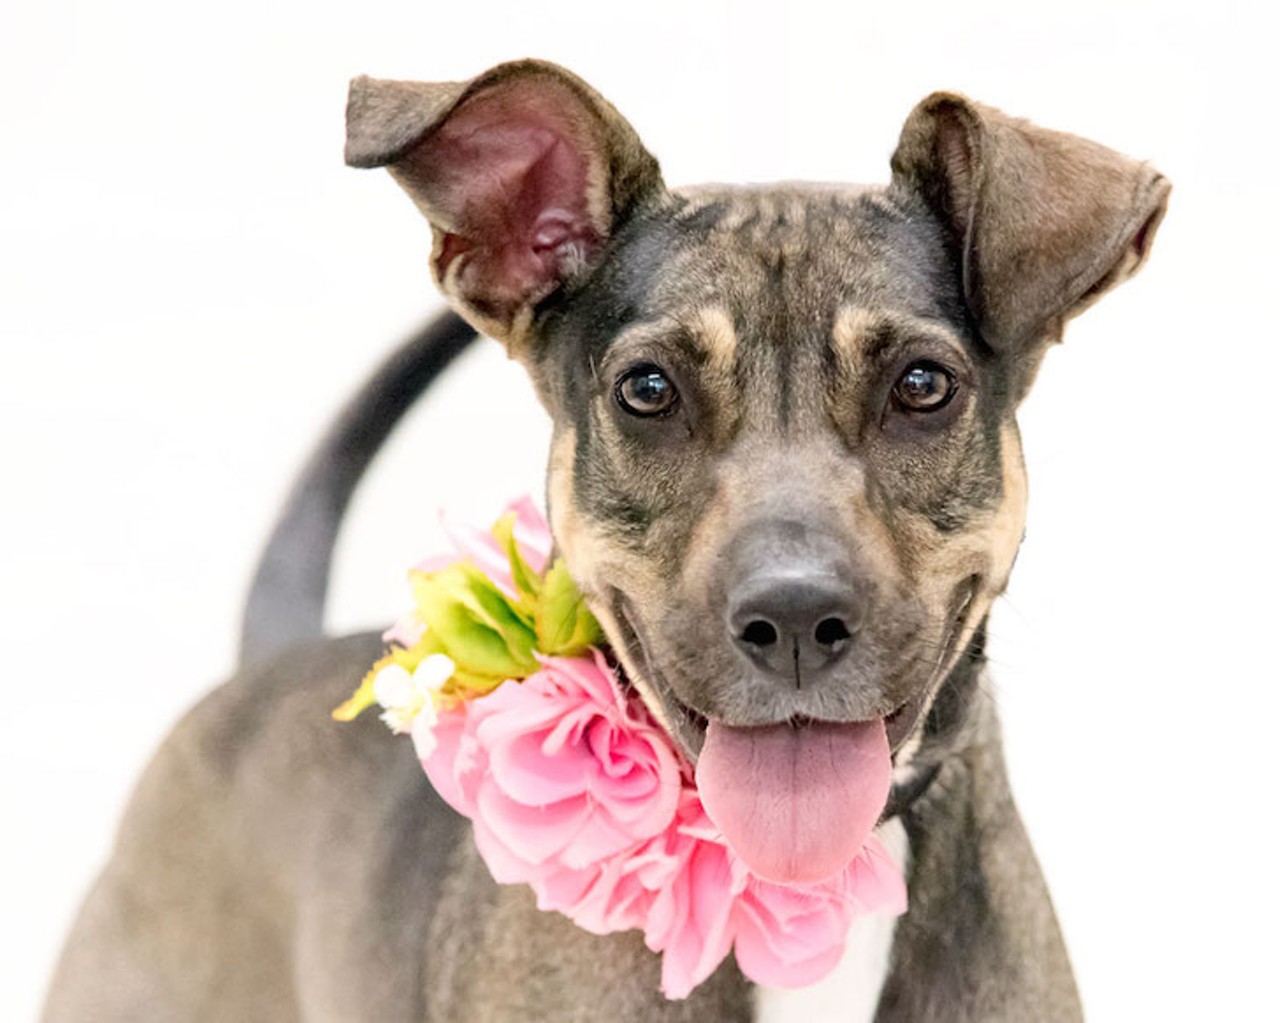 Adoptable dogs: 42 very 'good boys' you could be petting right now